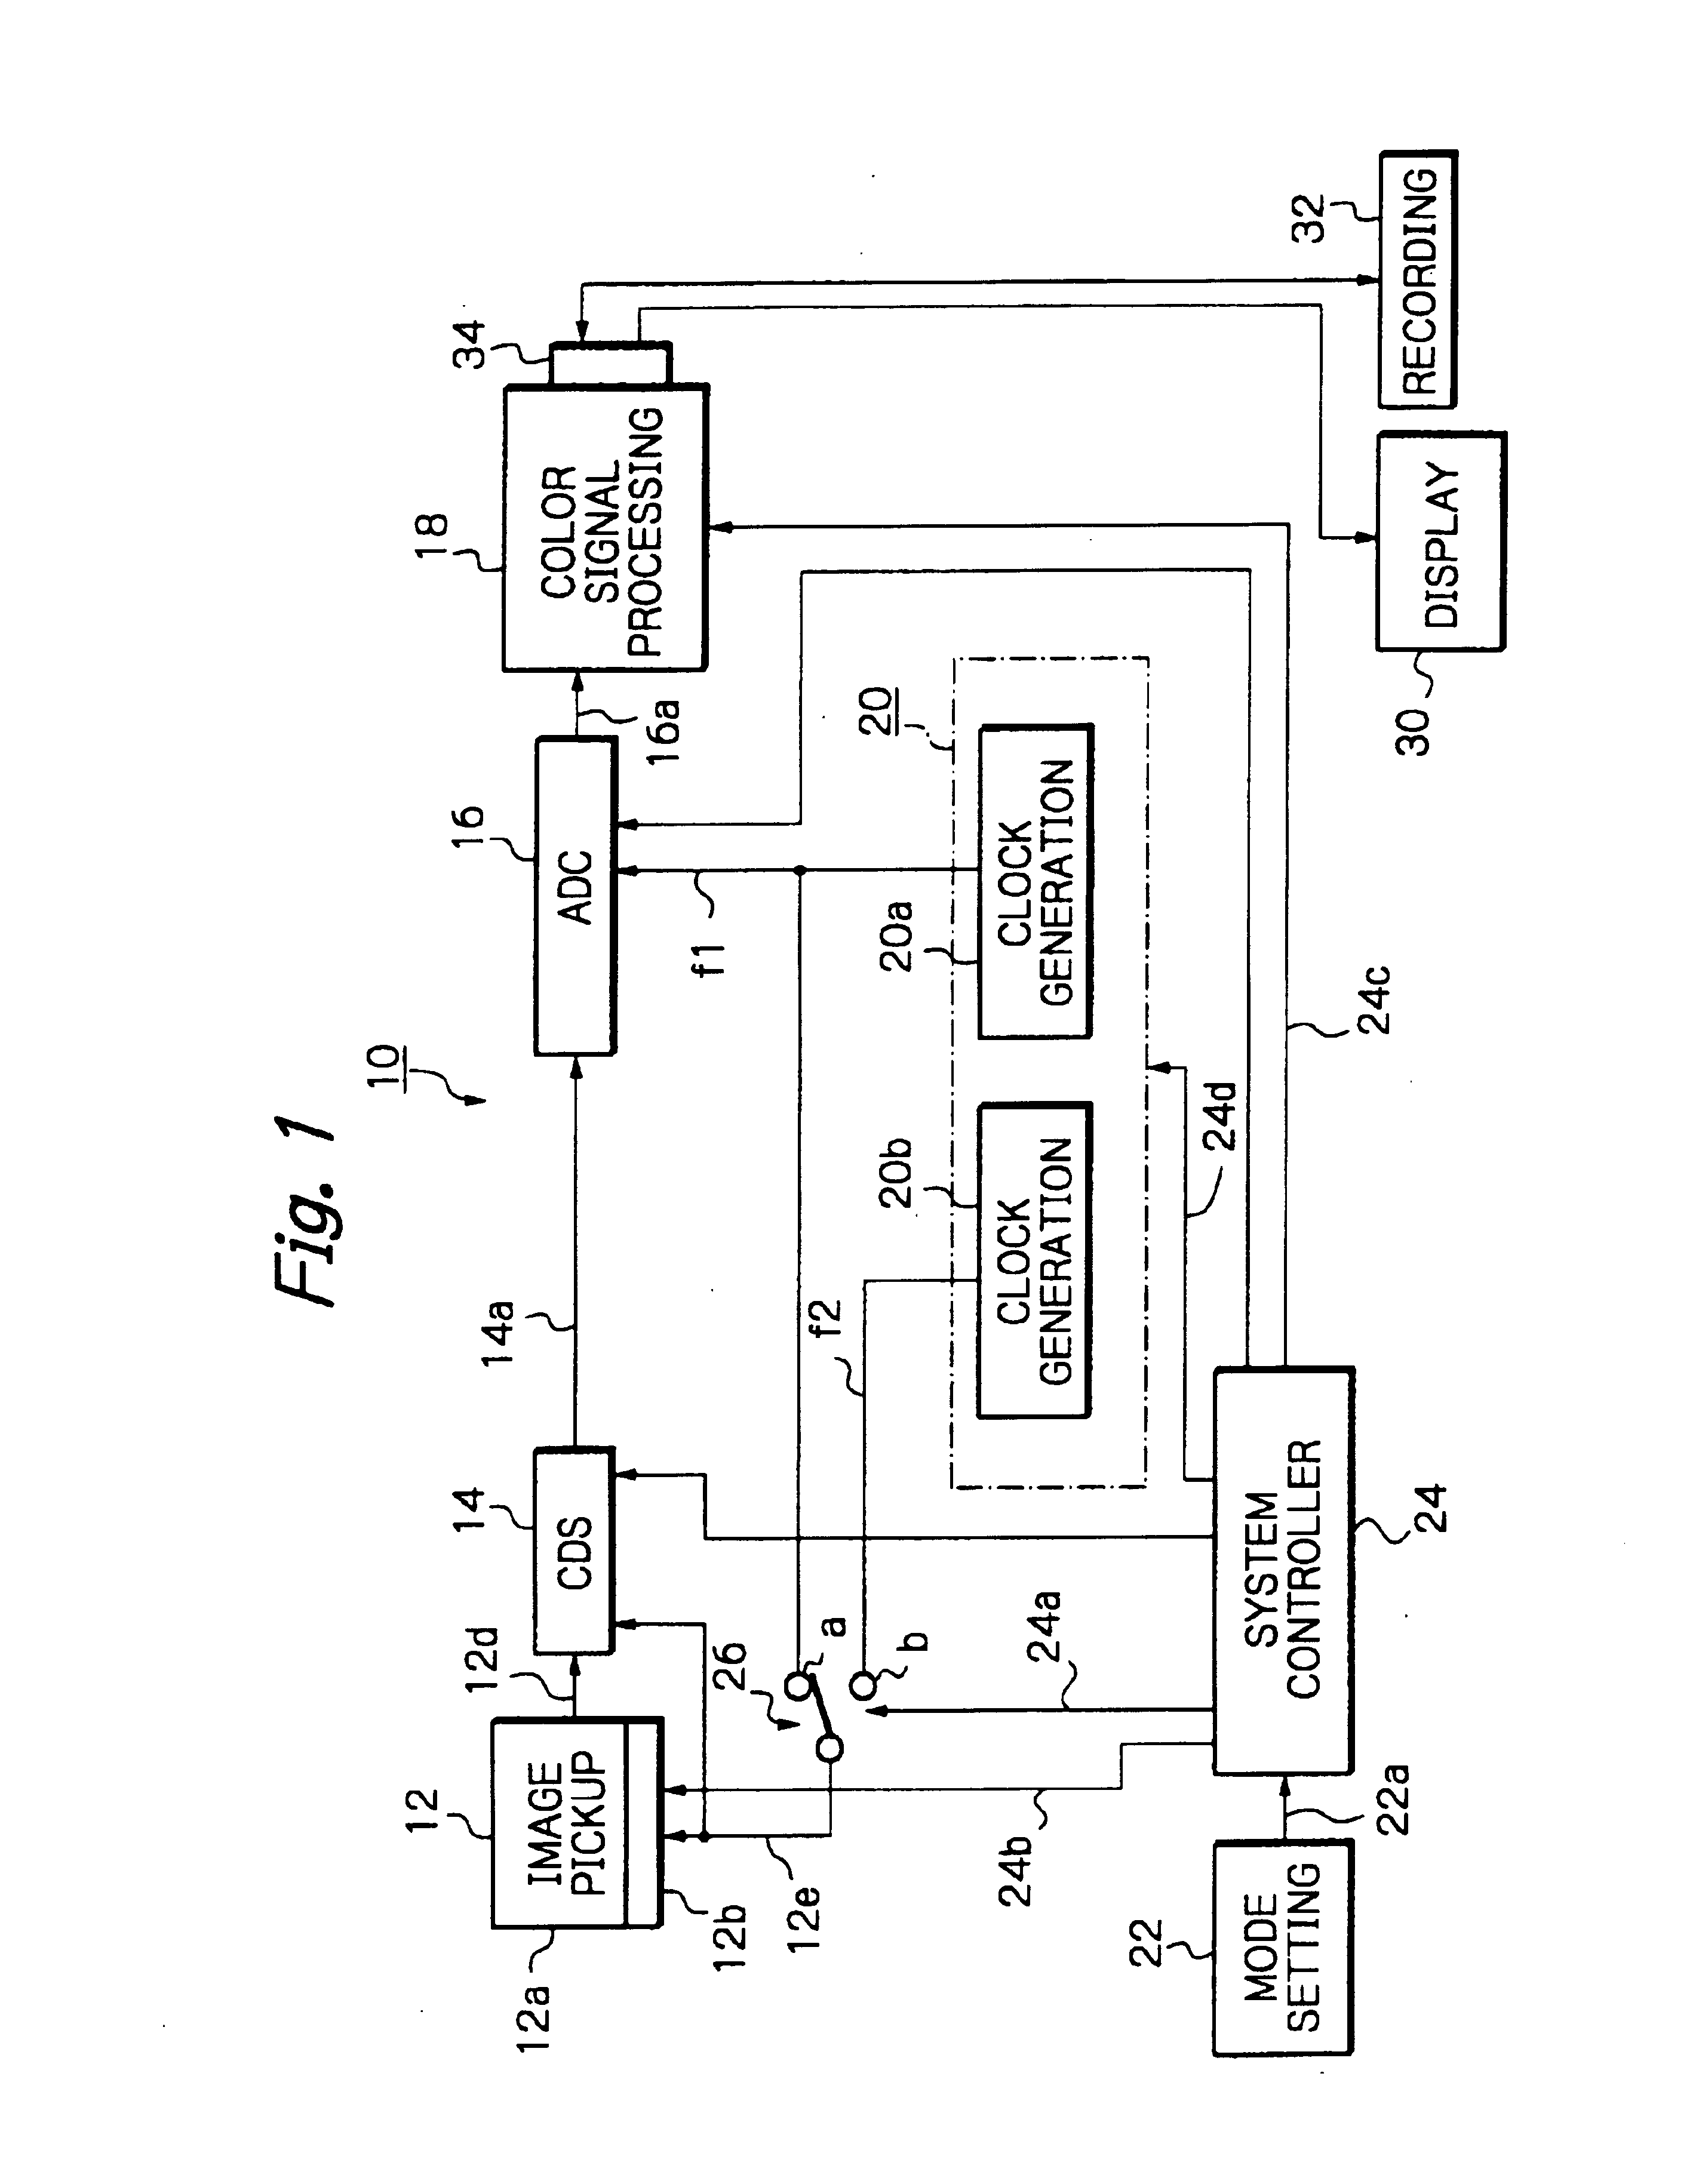 Solid-state image pickup apparatus adaptive to different display modes and having a high pixel density, synchronous video output capability and a method of signal processing